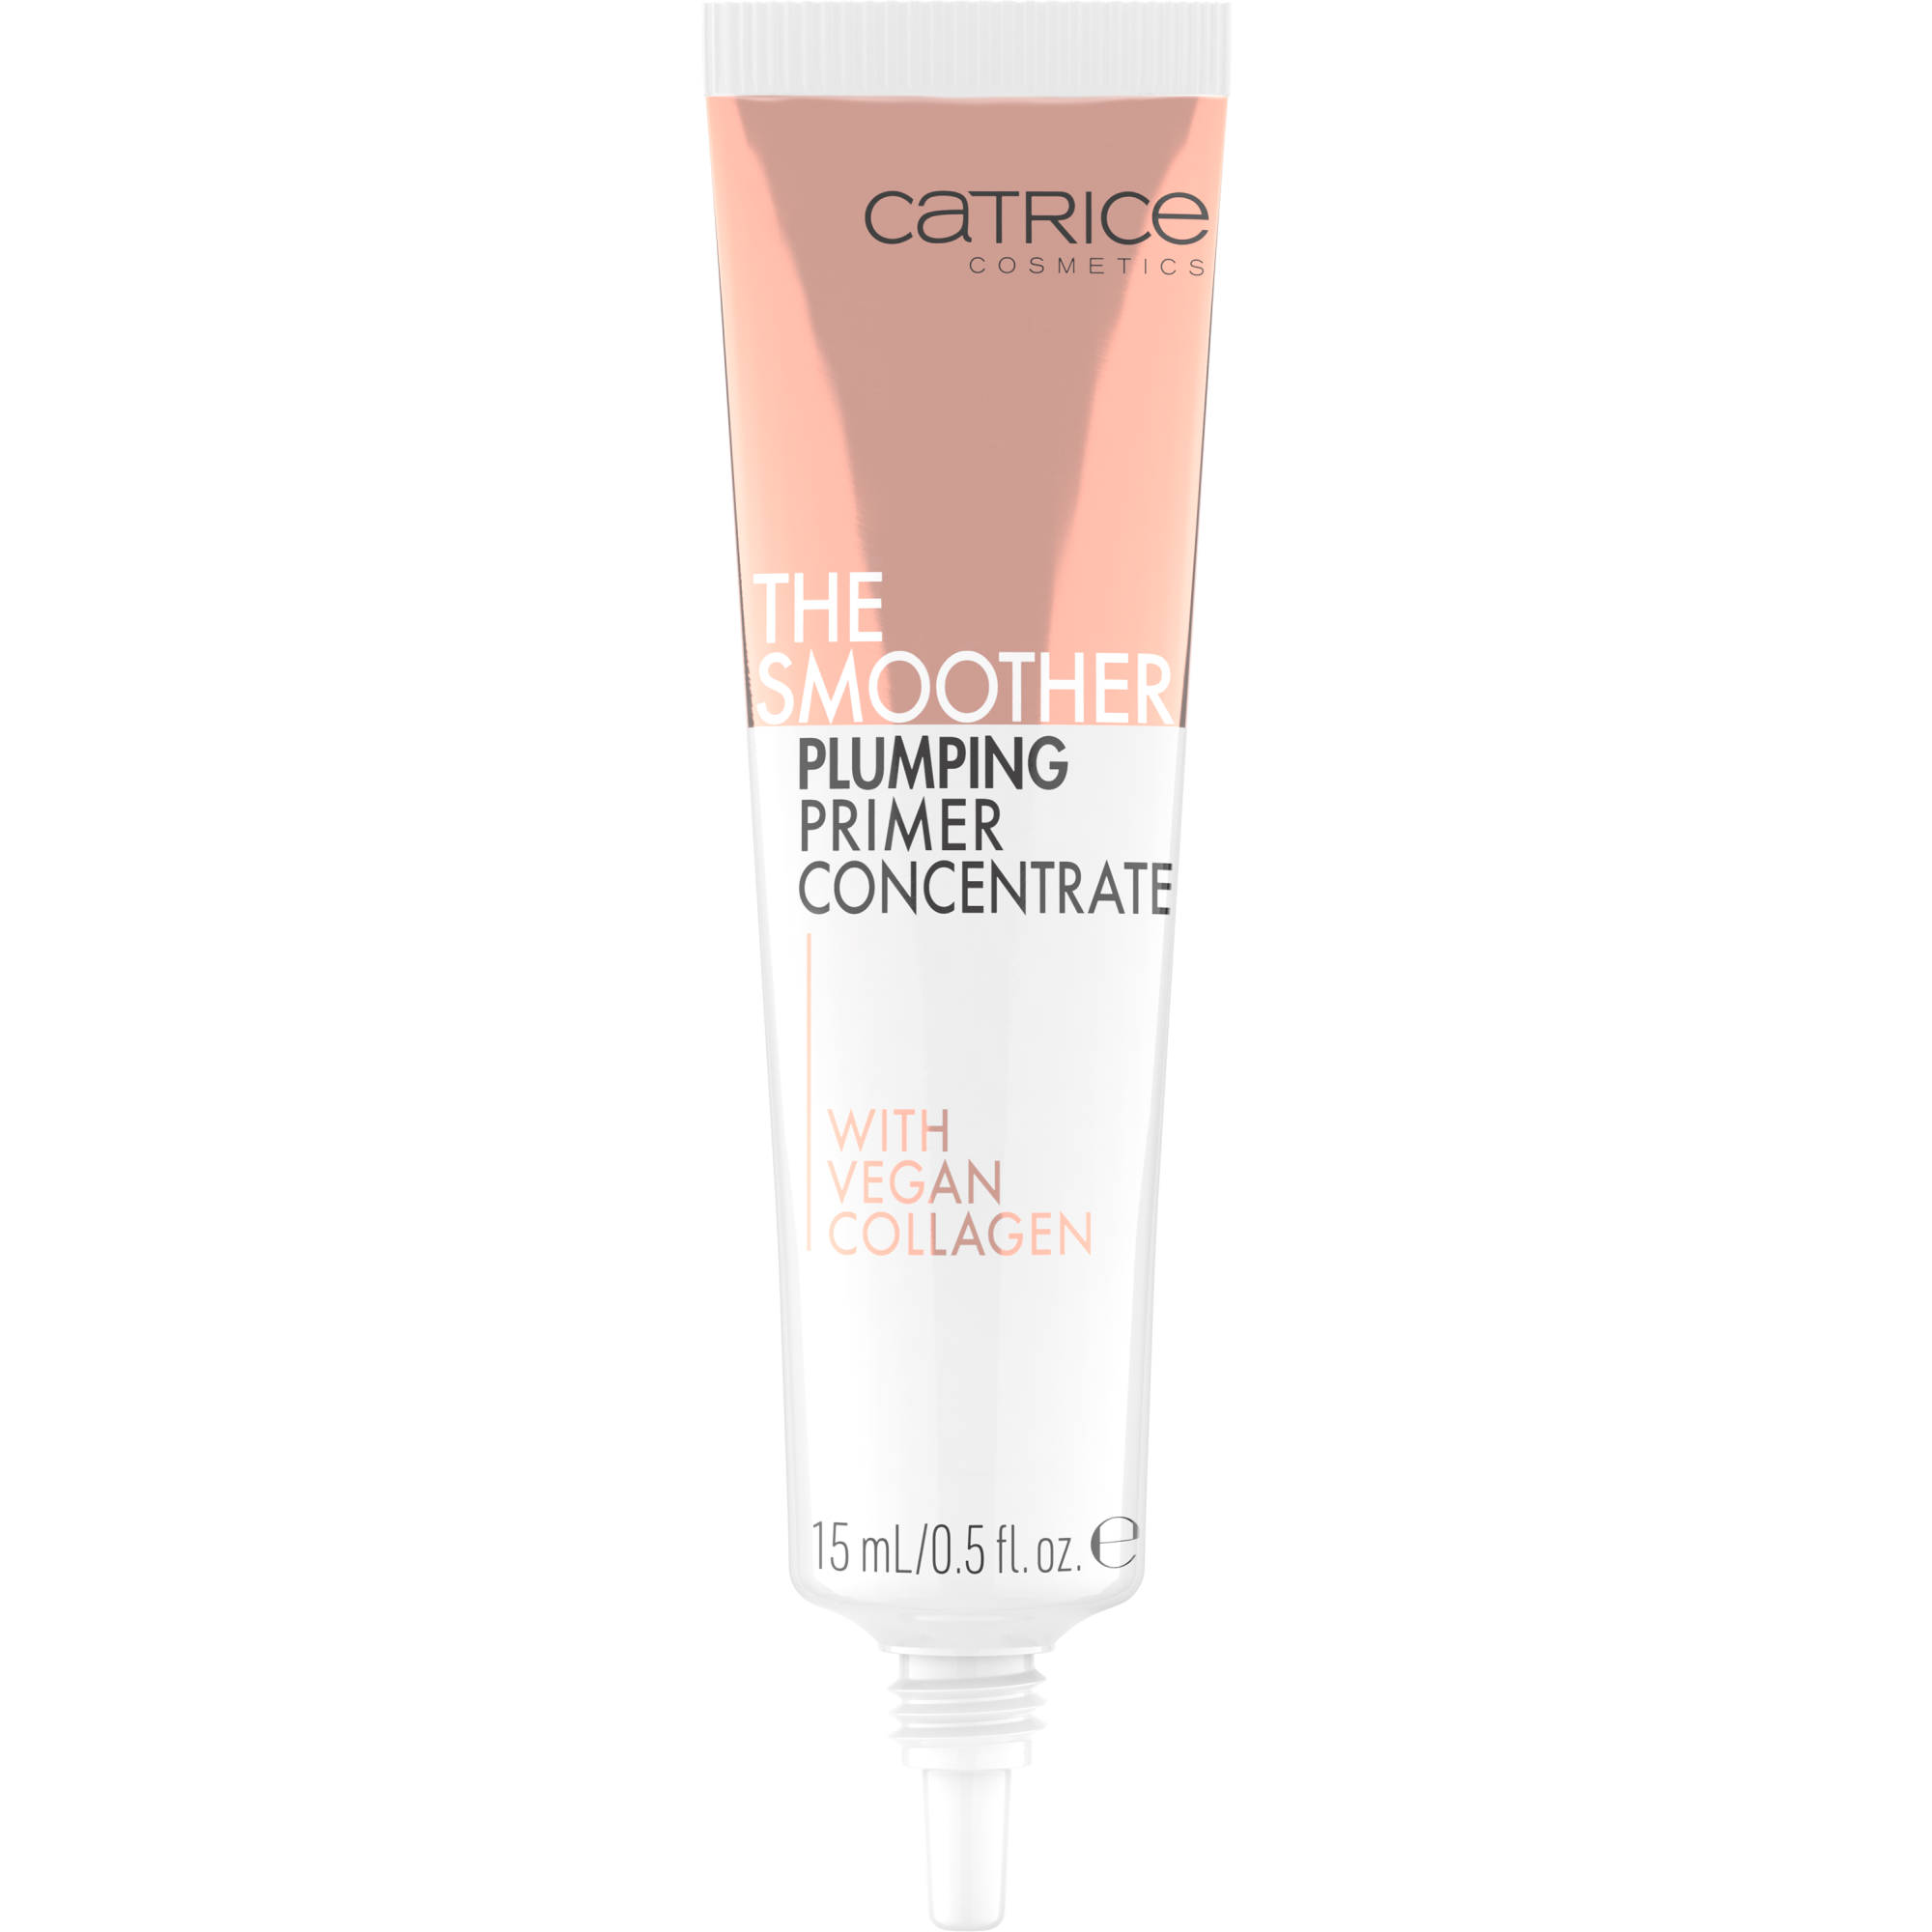 Smoother Plumping Primer Concentrate